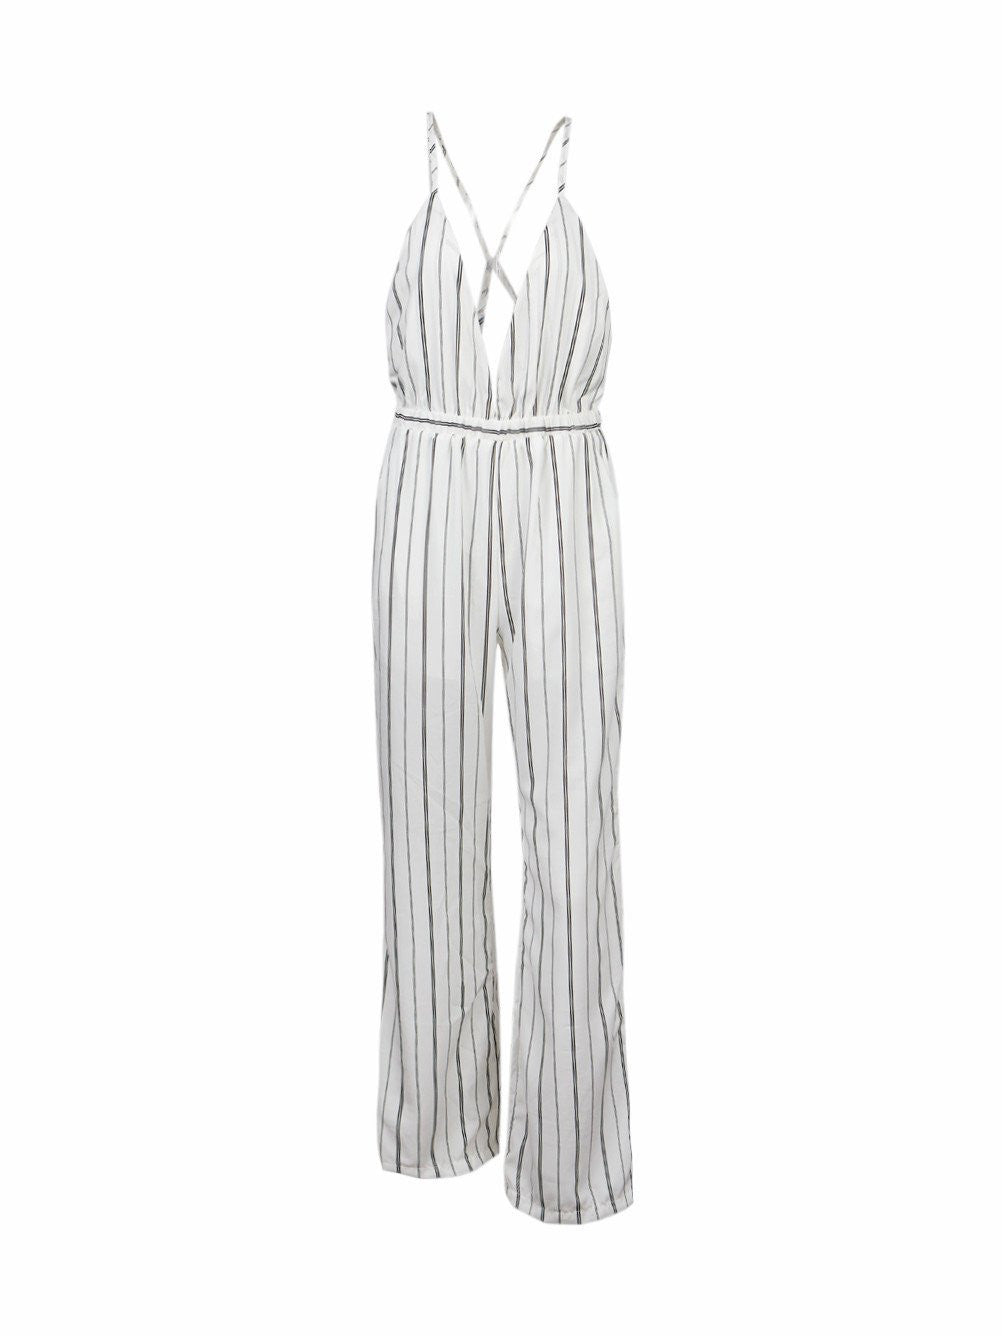 Strap Plunge Deep V Neck Backless Loose Vertical Striped Print White Wide Leg Jumpsuit Romper Casual Palazzo Pants